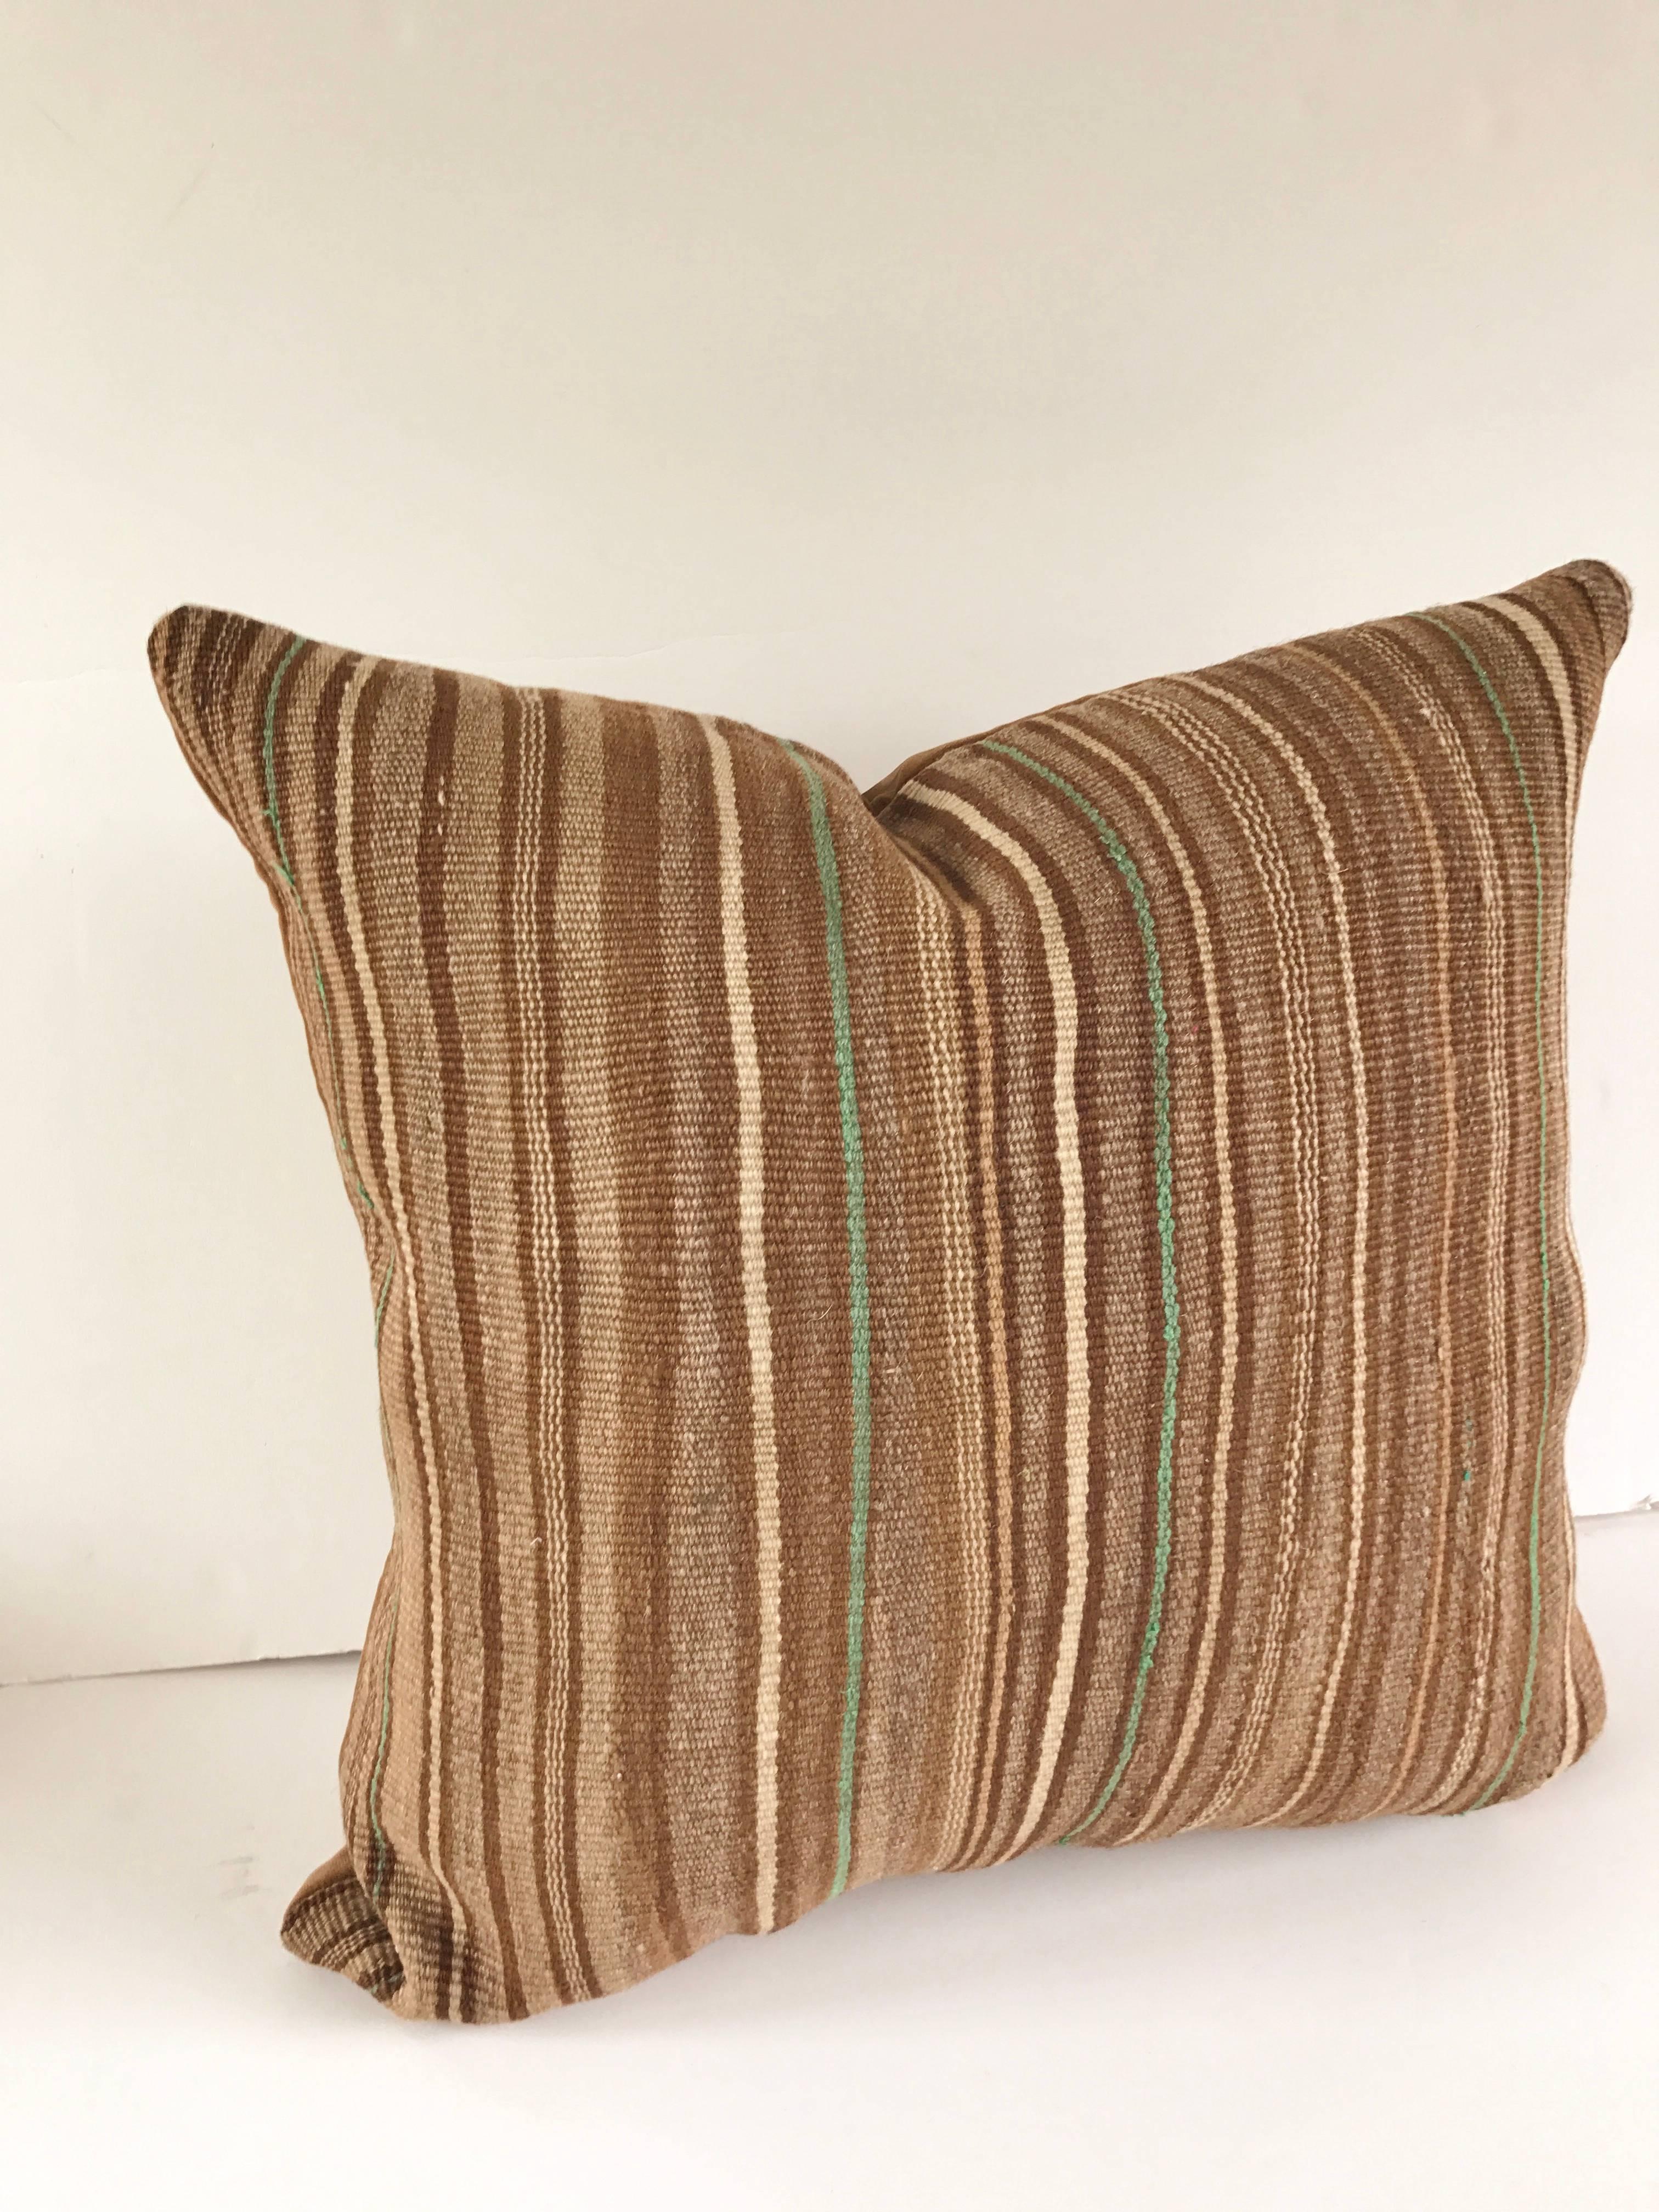 Custom pillow cut from a vintage hand-loomed wool Moroccan Berber blanket or rug from the Atlas Mountains. Wool is soft and lustrous win natural color. Pillow is backed in a nut meg brown velvet, filled with an insert of 50/50 down and feathers and